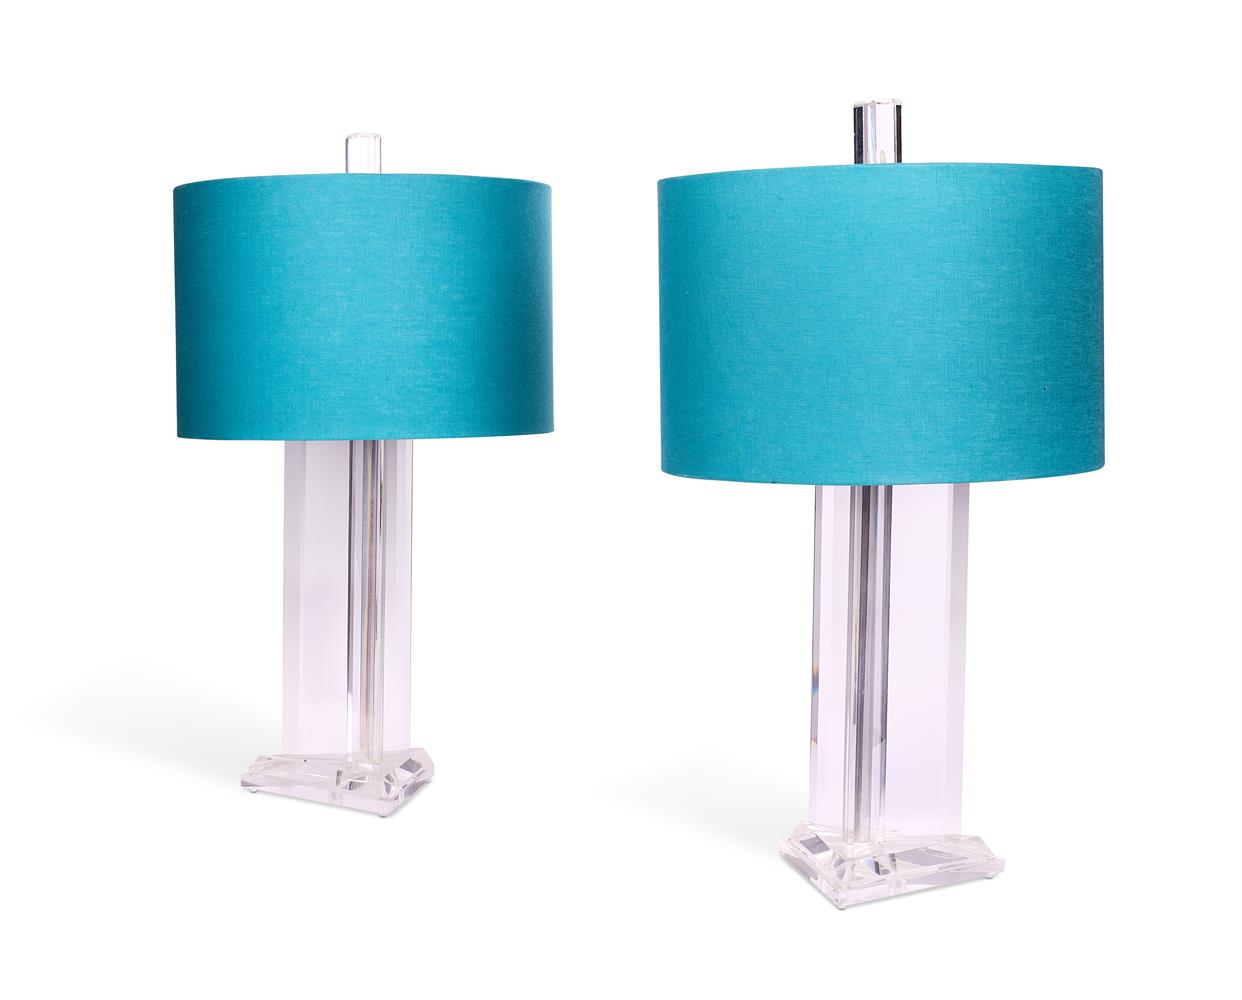 A PAIR OF LUCITE TABLE LAMPS, LATE 20TH CENTURY